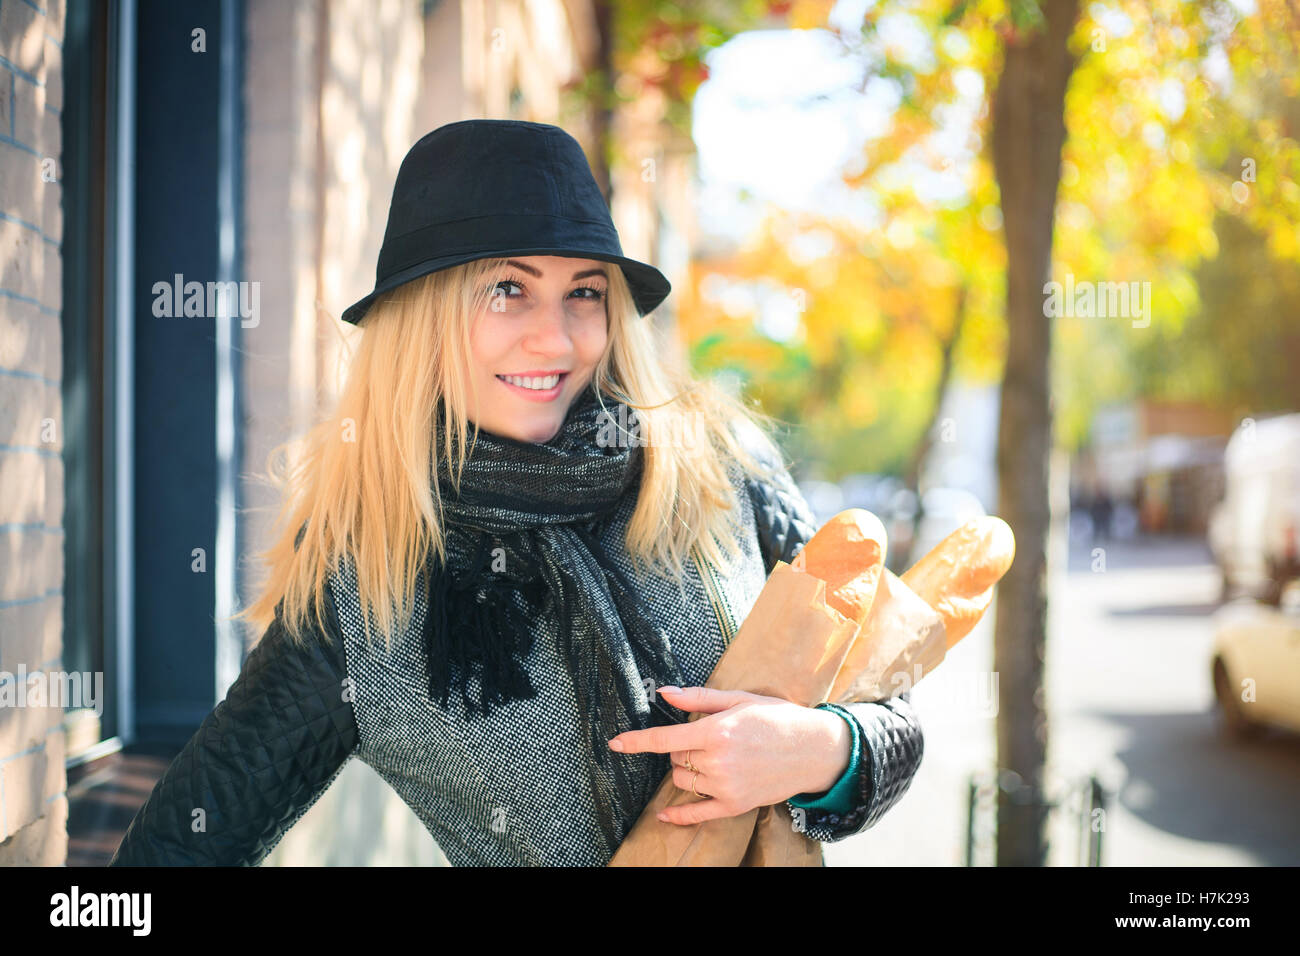 Young beautiful woman with a loaf of bread in her hands in autumn. Outdoors portrait. Stock Photo